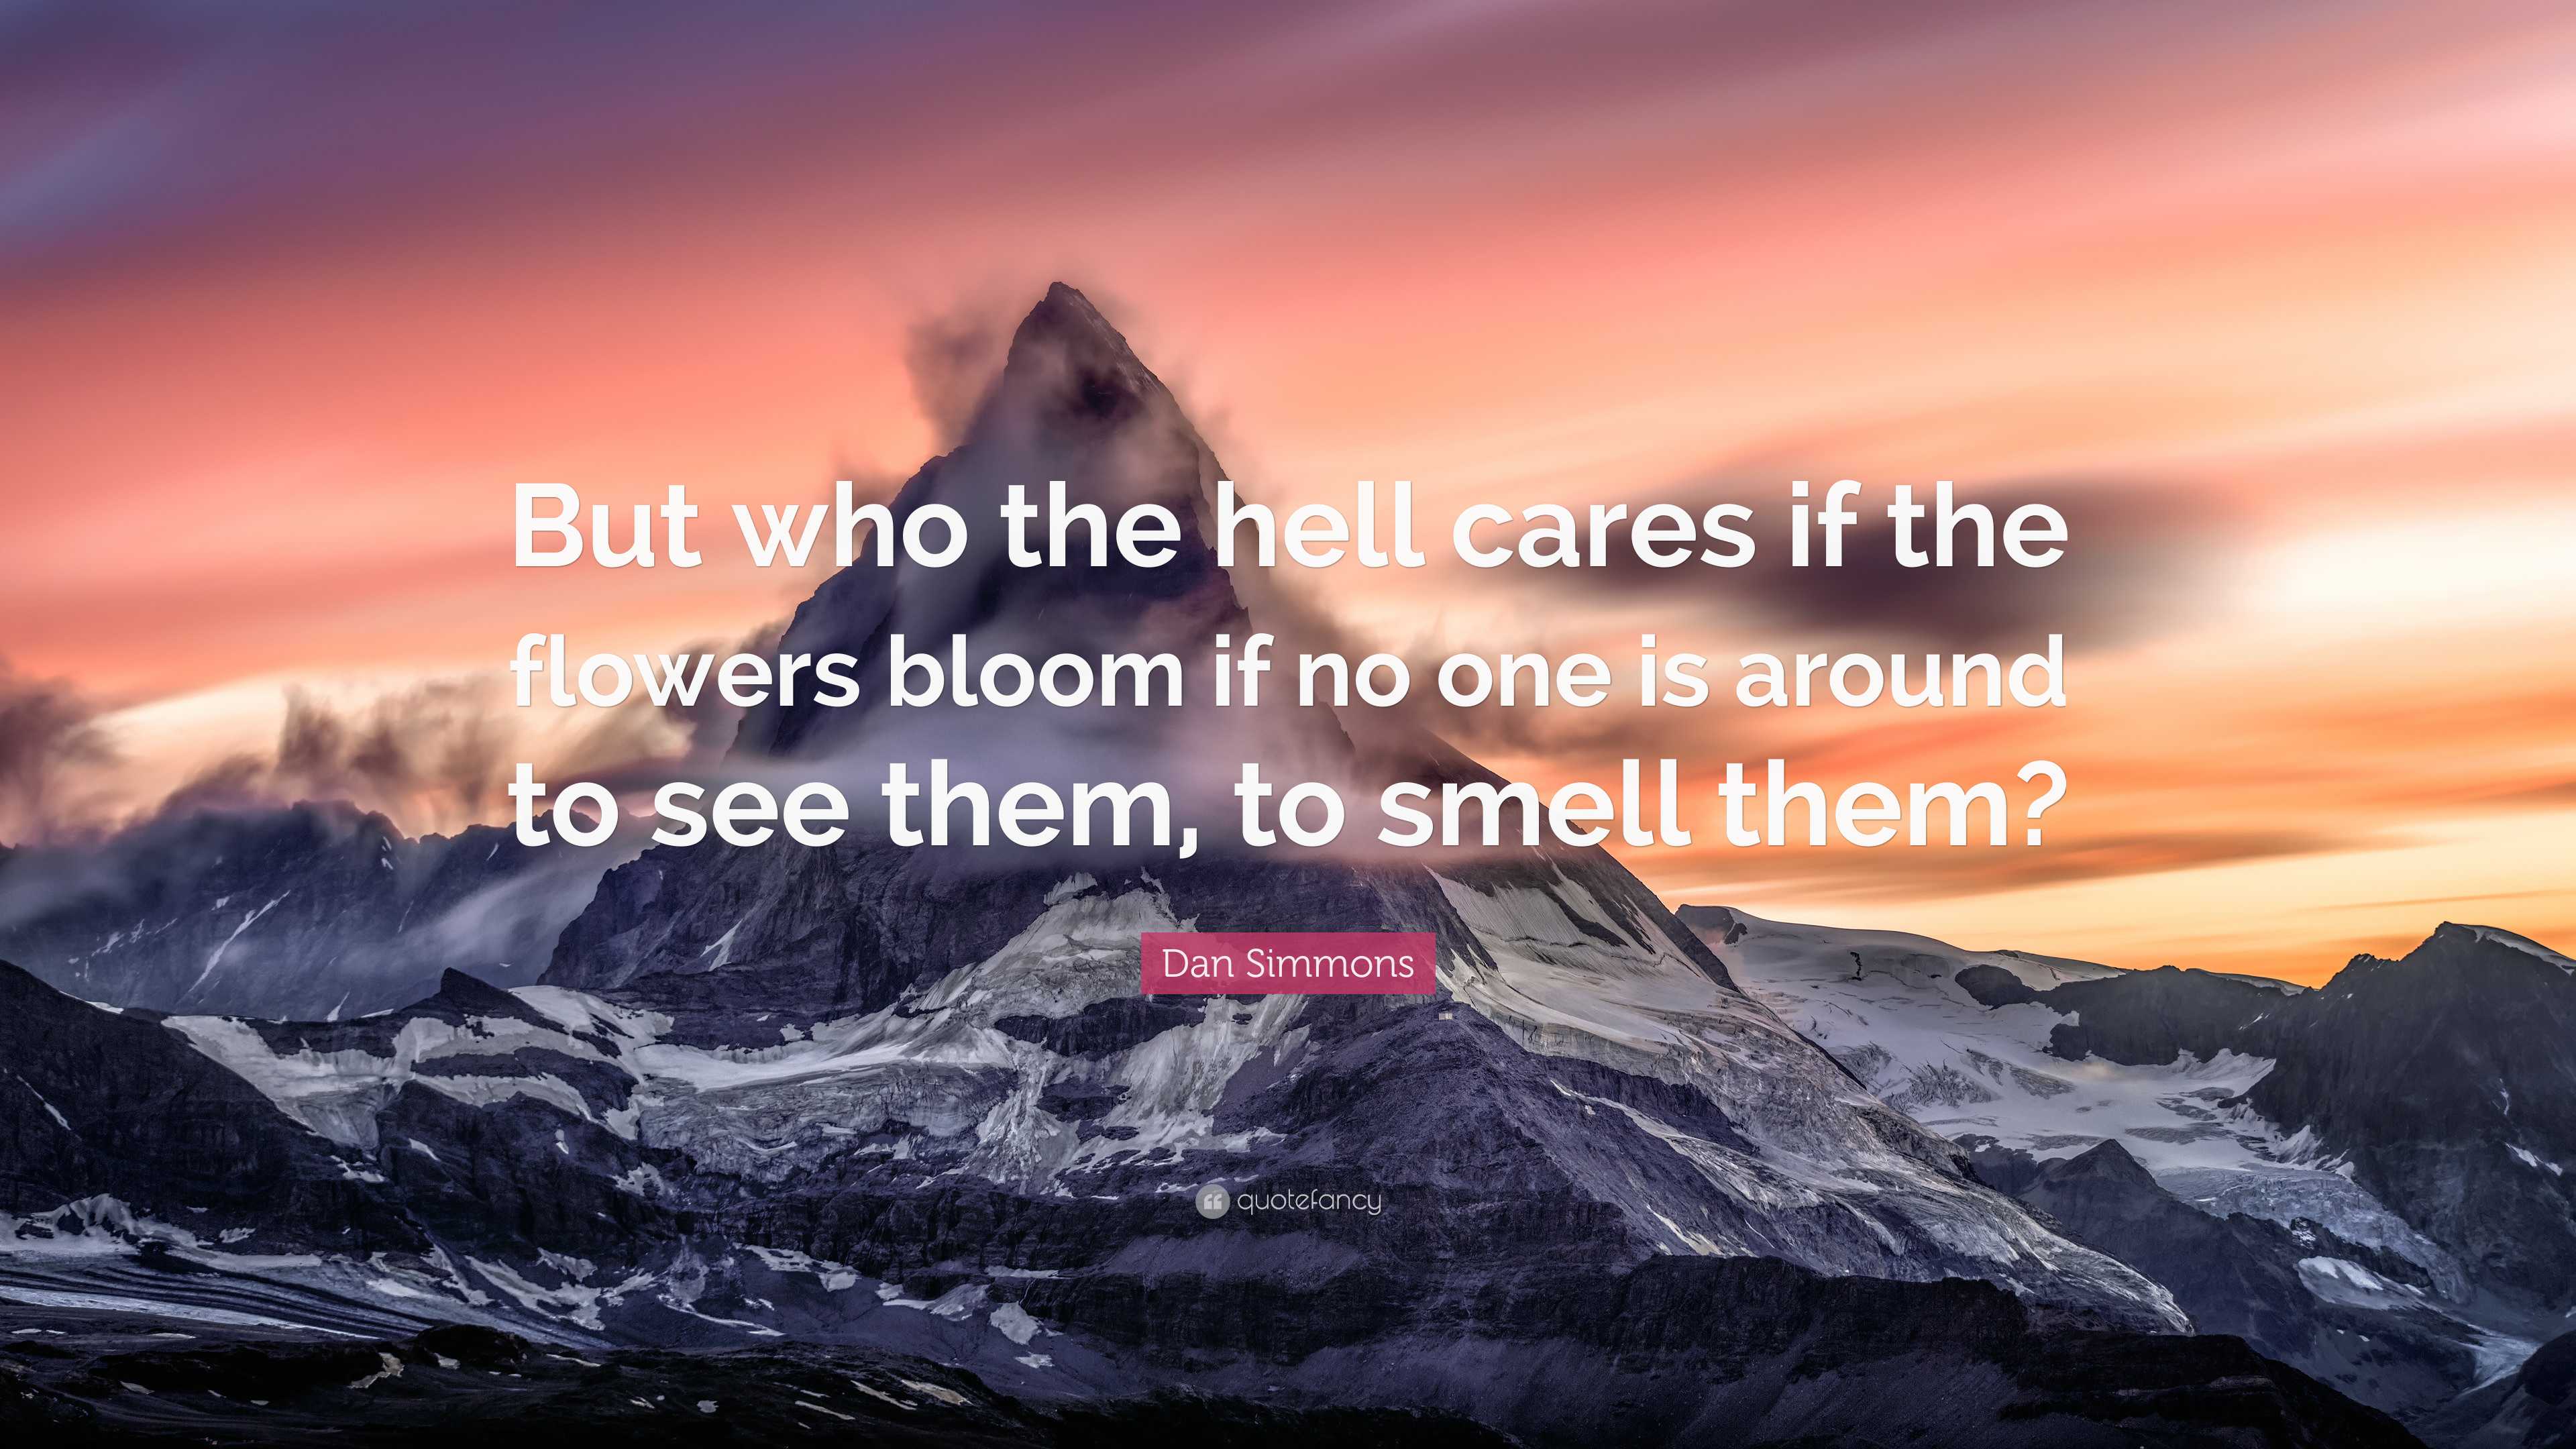 Dan Simmons Quote: “But who the hell cares if the flowers bloom if